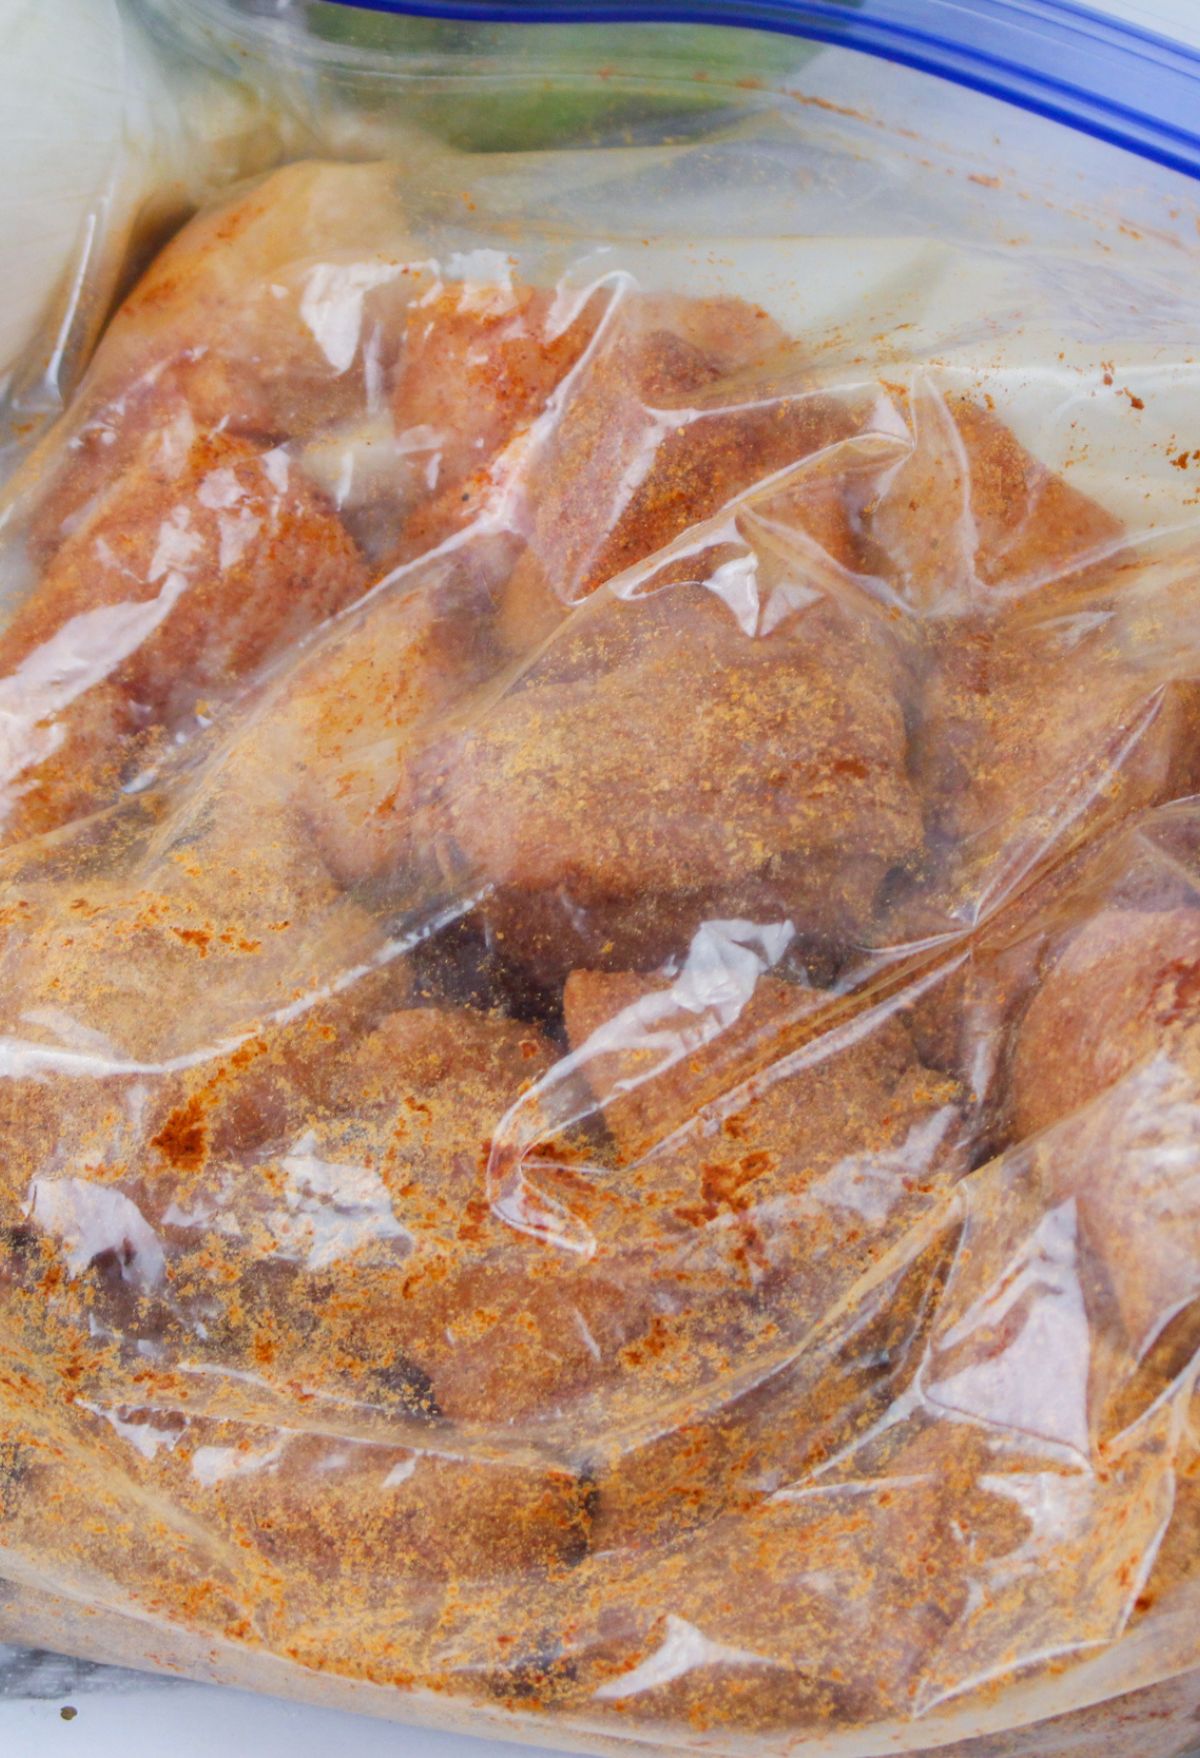 A bag of chicken in a plastic bag.